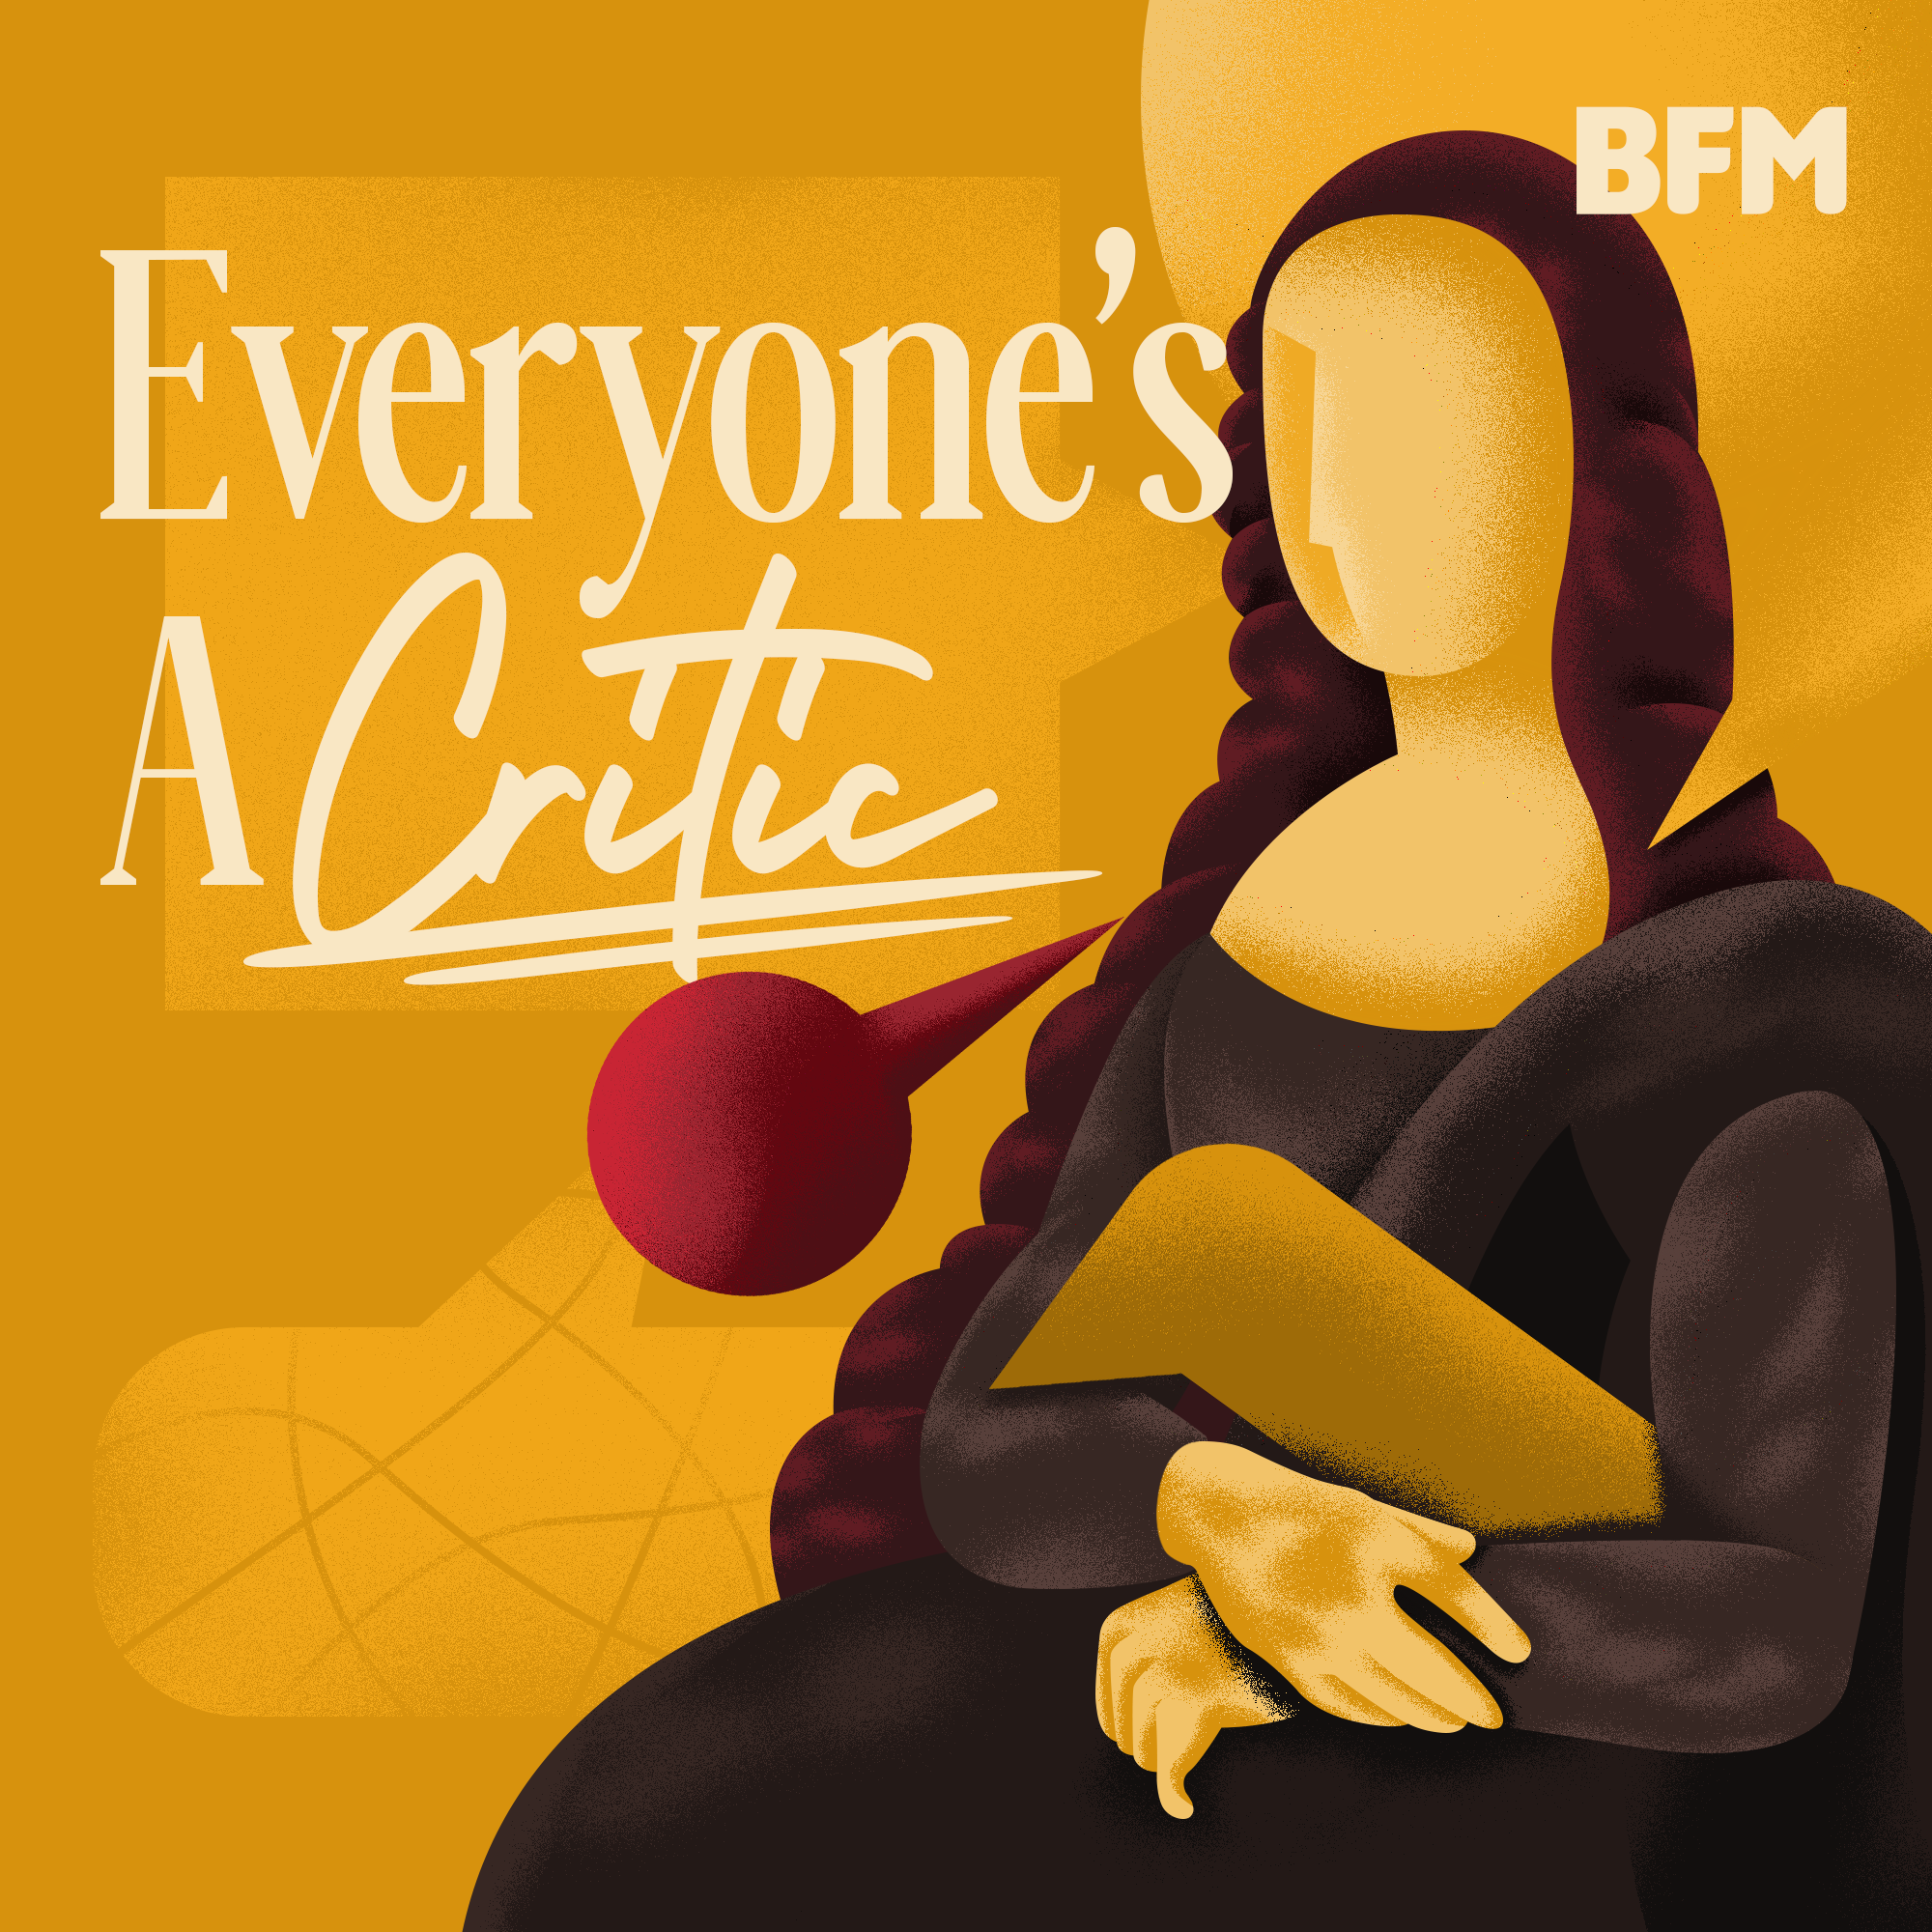 Everyone’s A Critic - My Prom Date, The Axe Murderer